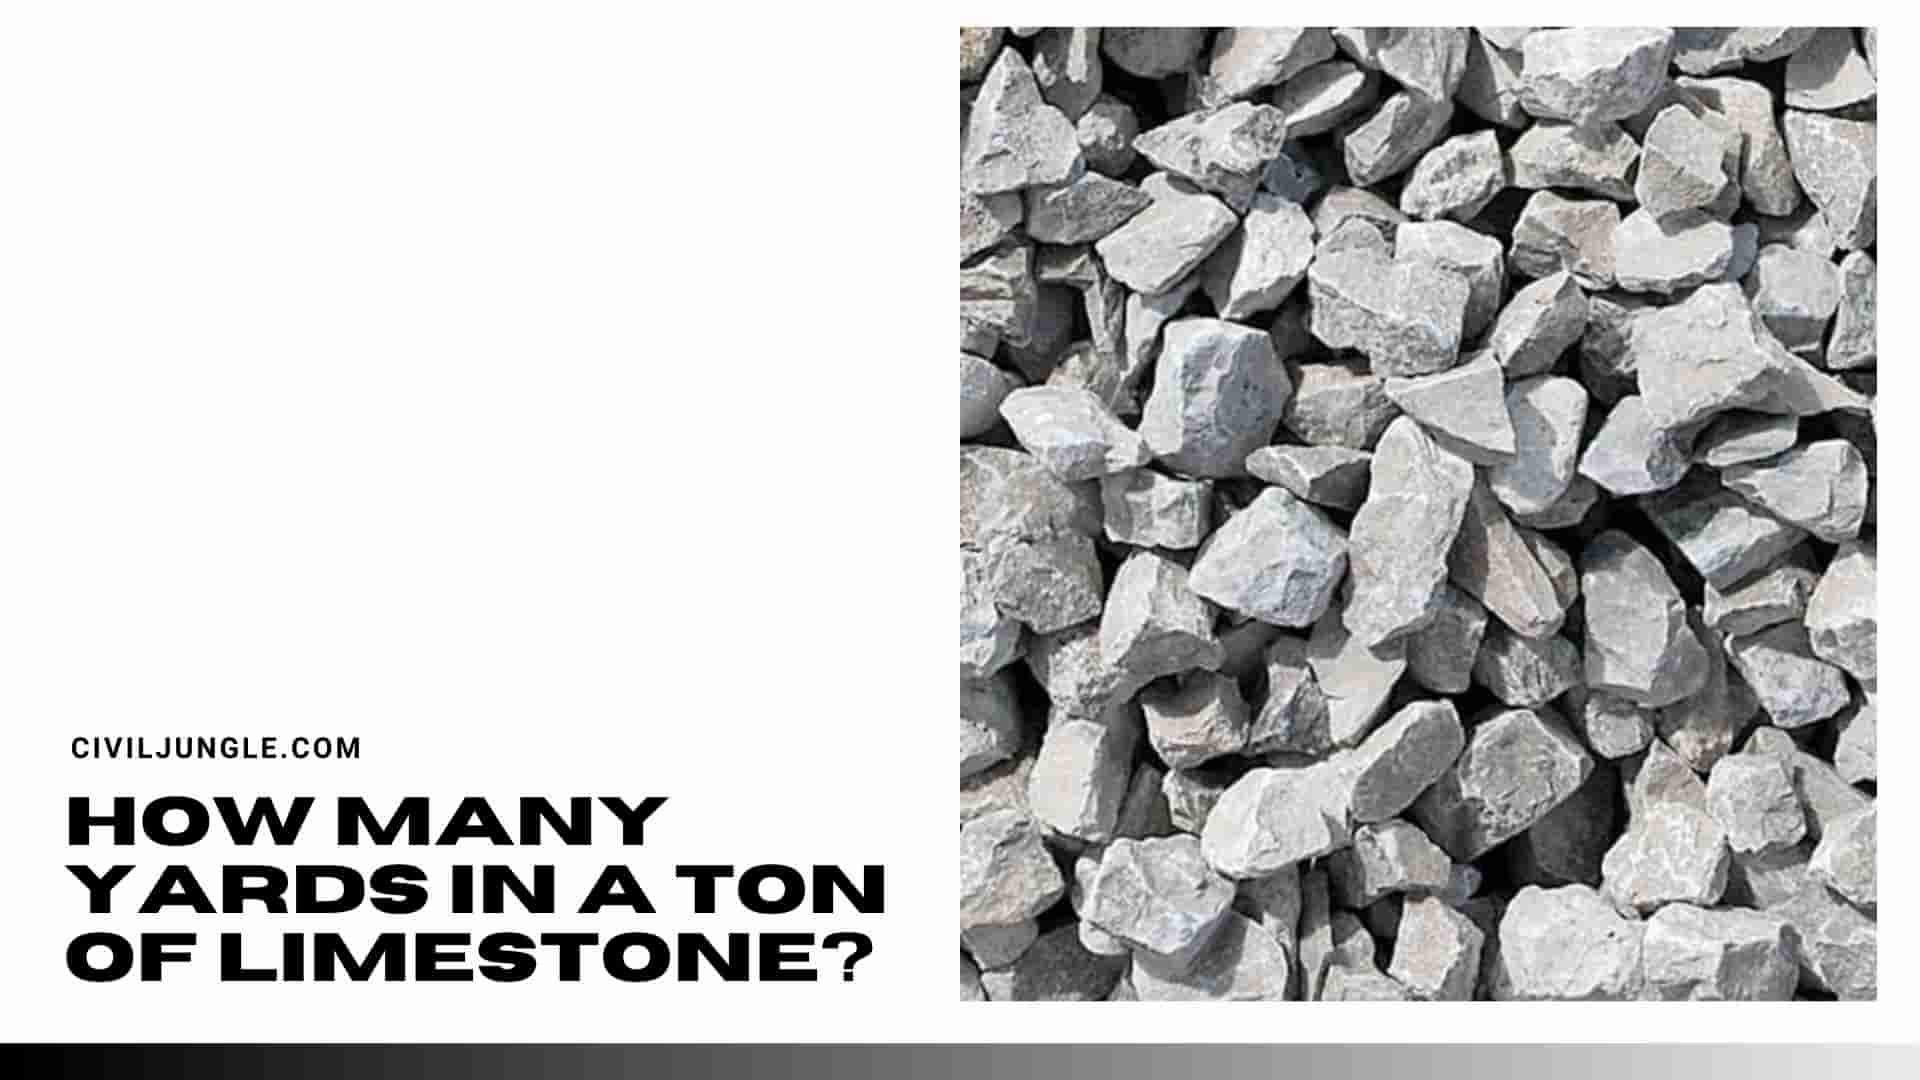 How Many Yards in a Ton of Limestone?